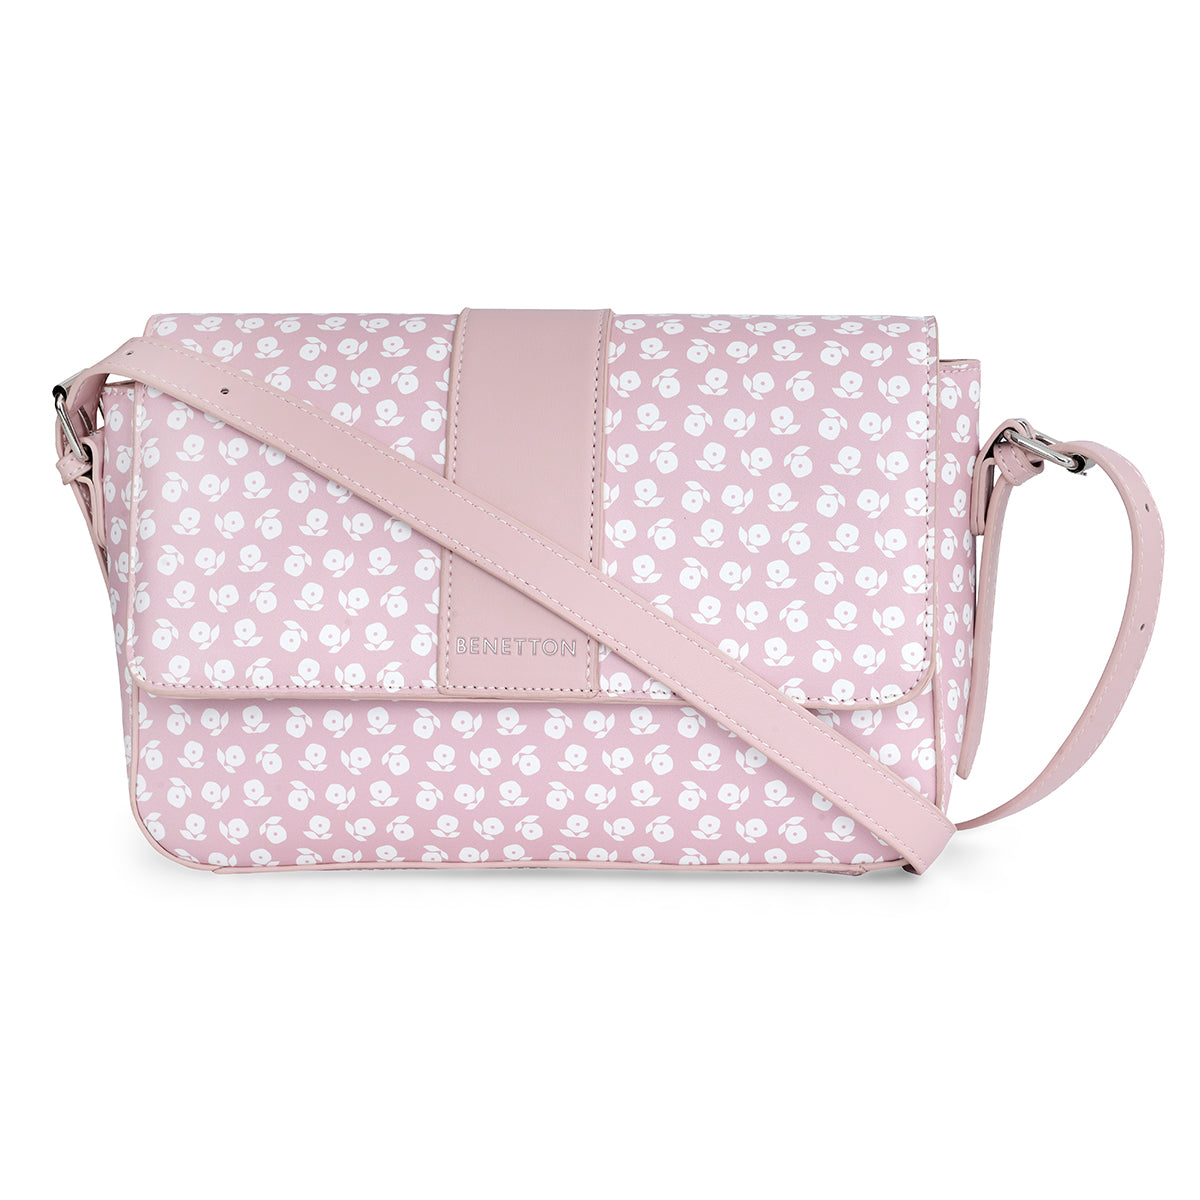 United Colors of Benetton Gianna Sling Pink